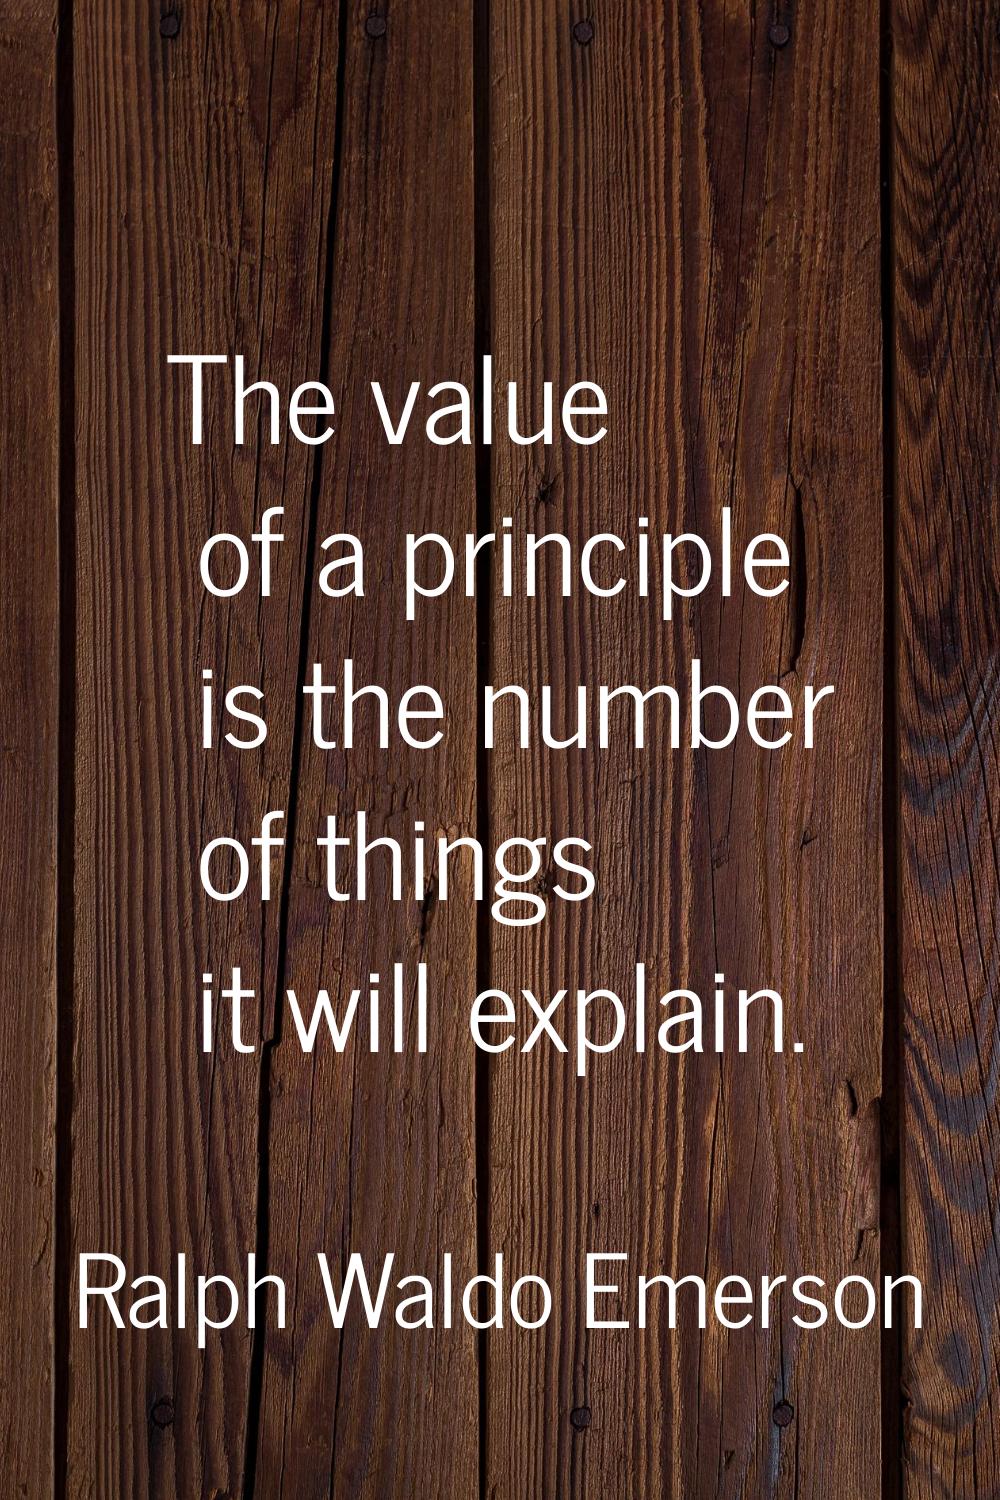 The value of a principle is the number of things it will explain.